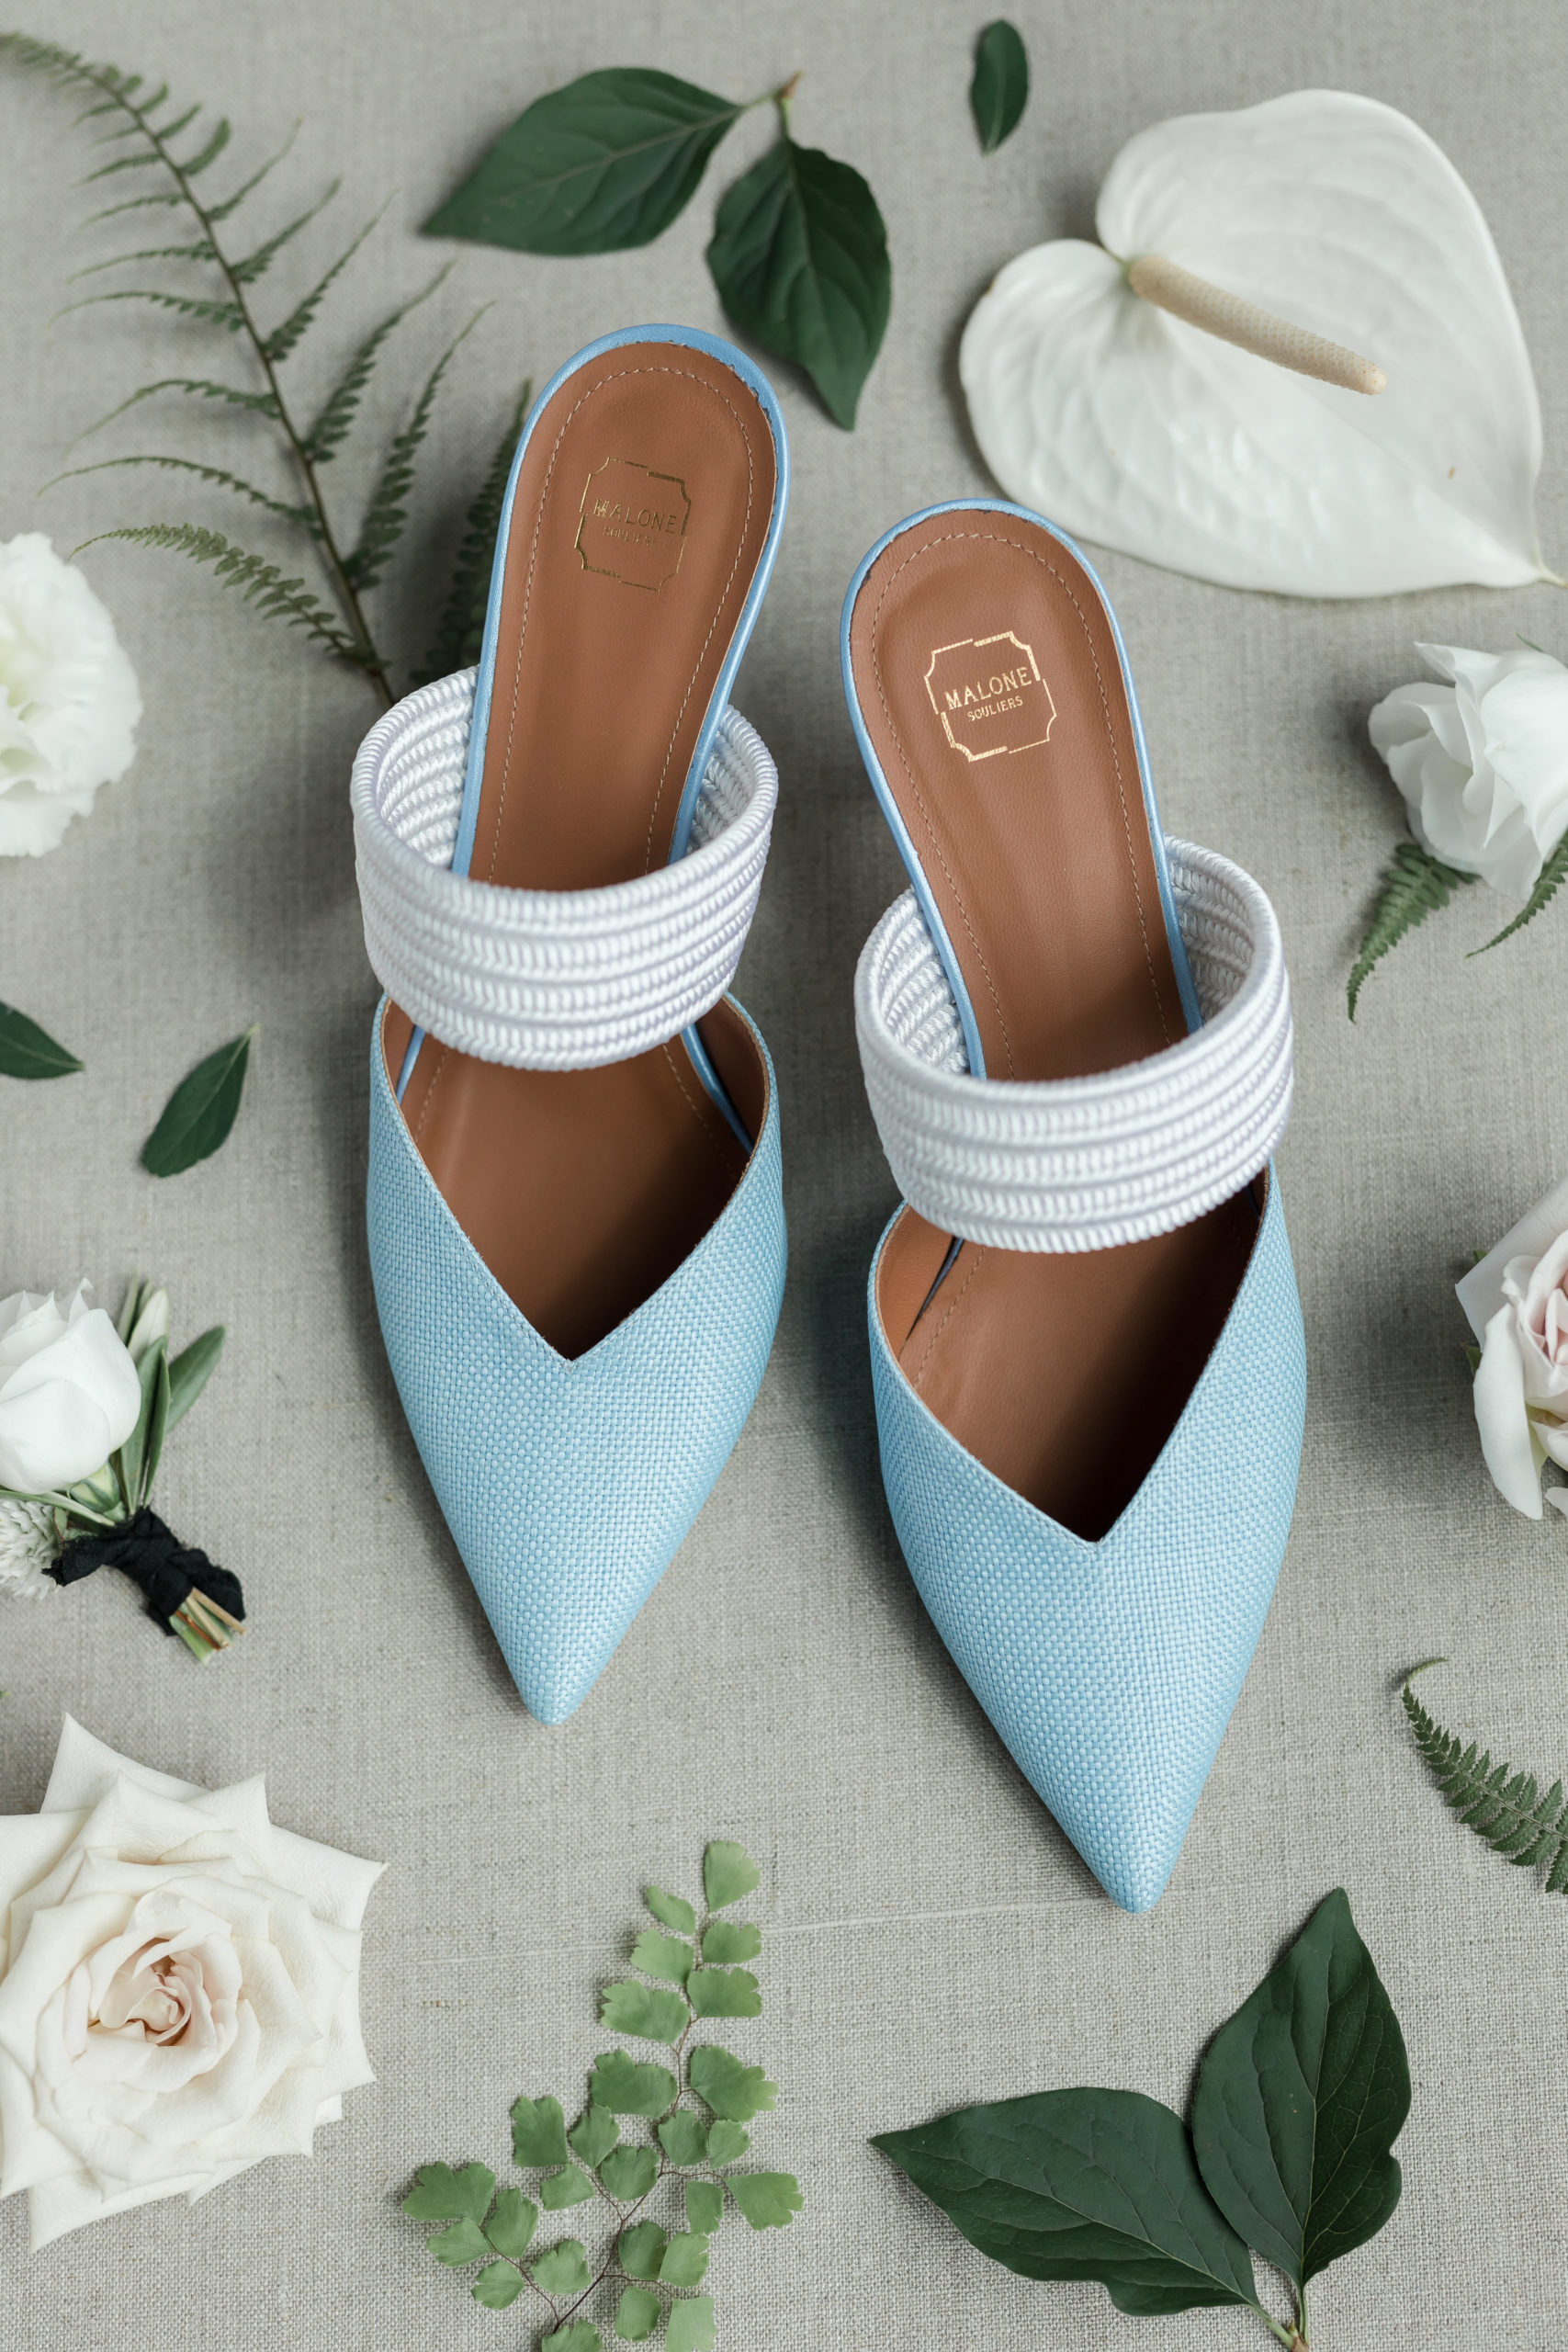 malone-souliers-wedding-shoes